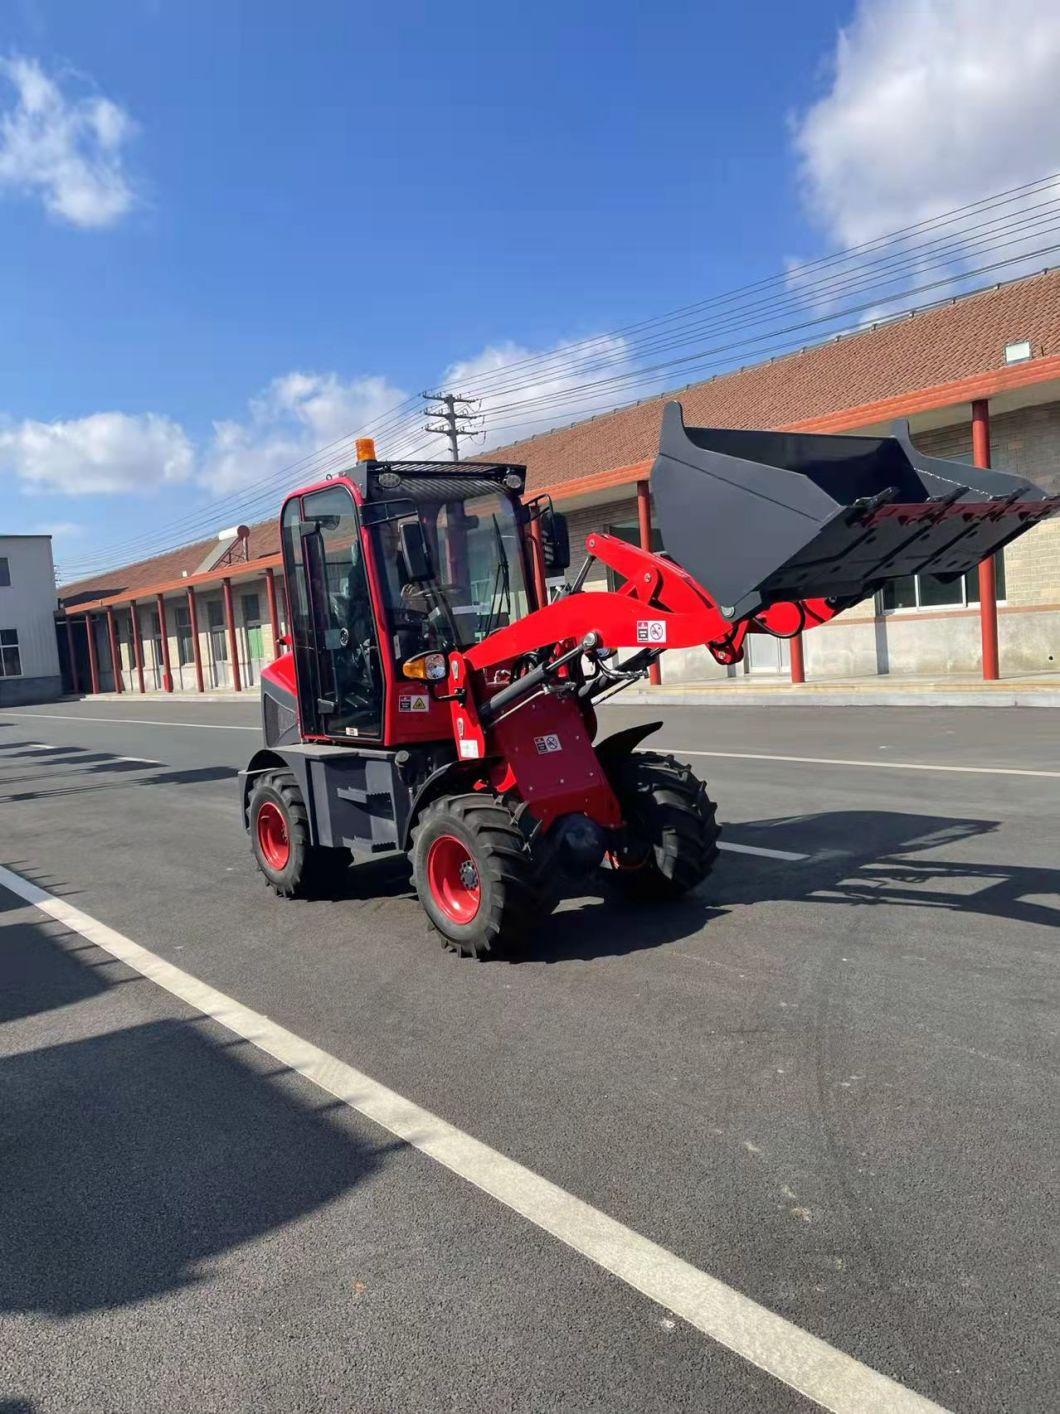 China Factory Wholesale 1/1.2/1.5/2/3tons Small Wheel Loader Small Forklift Skid Steer Loader 4WD Front Loader CE Certification Euro 5 Engine Construction Sit